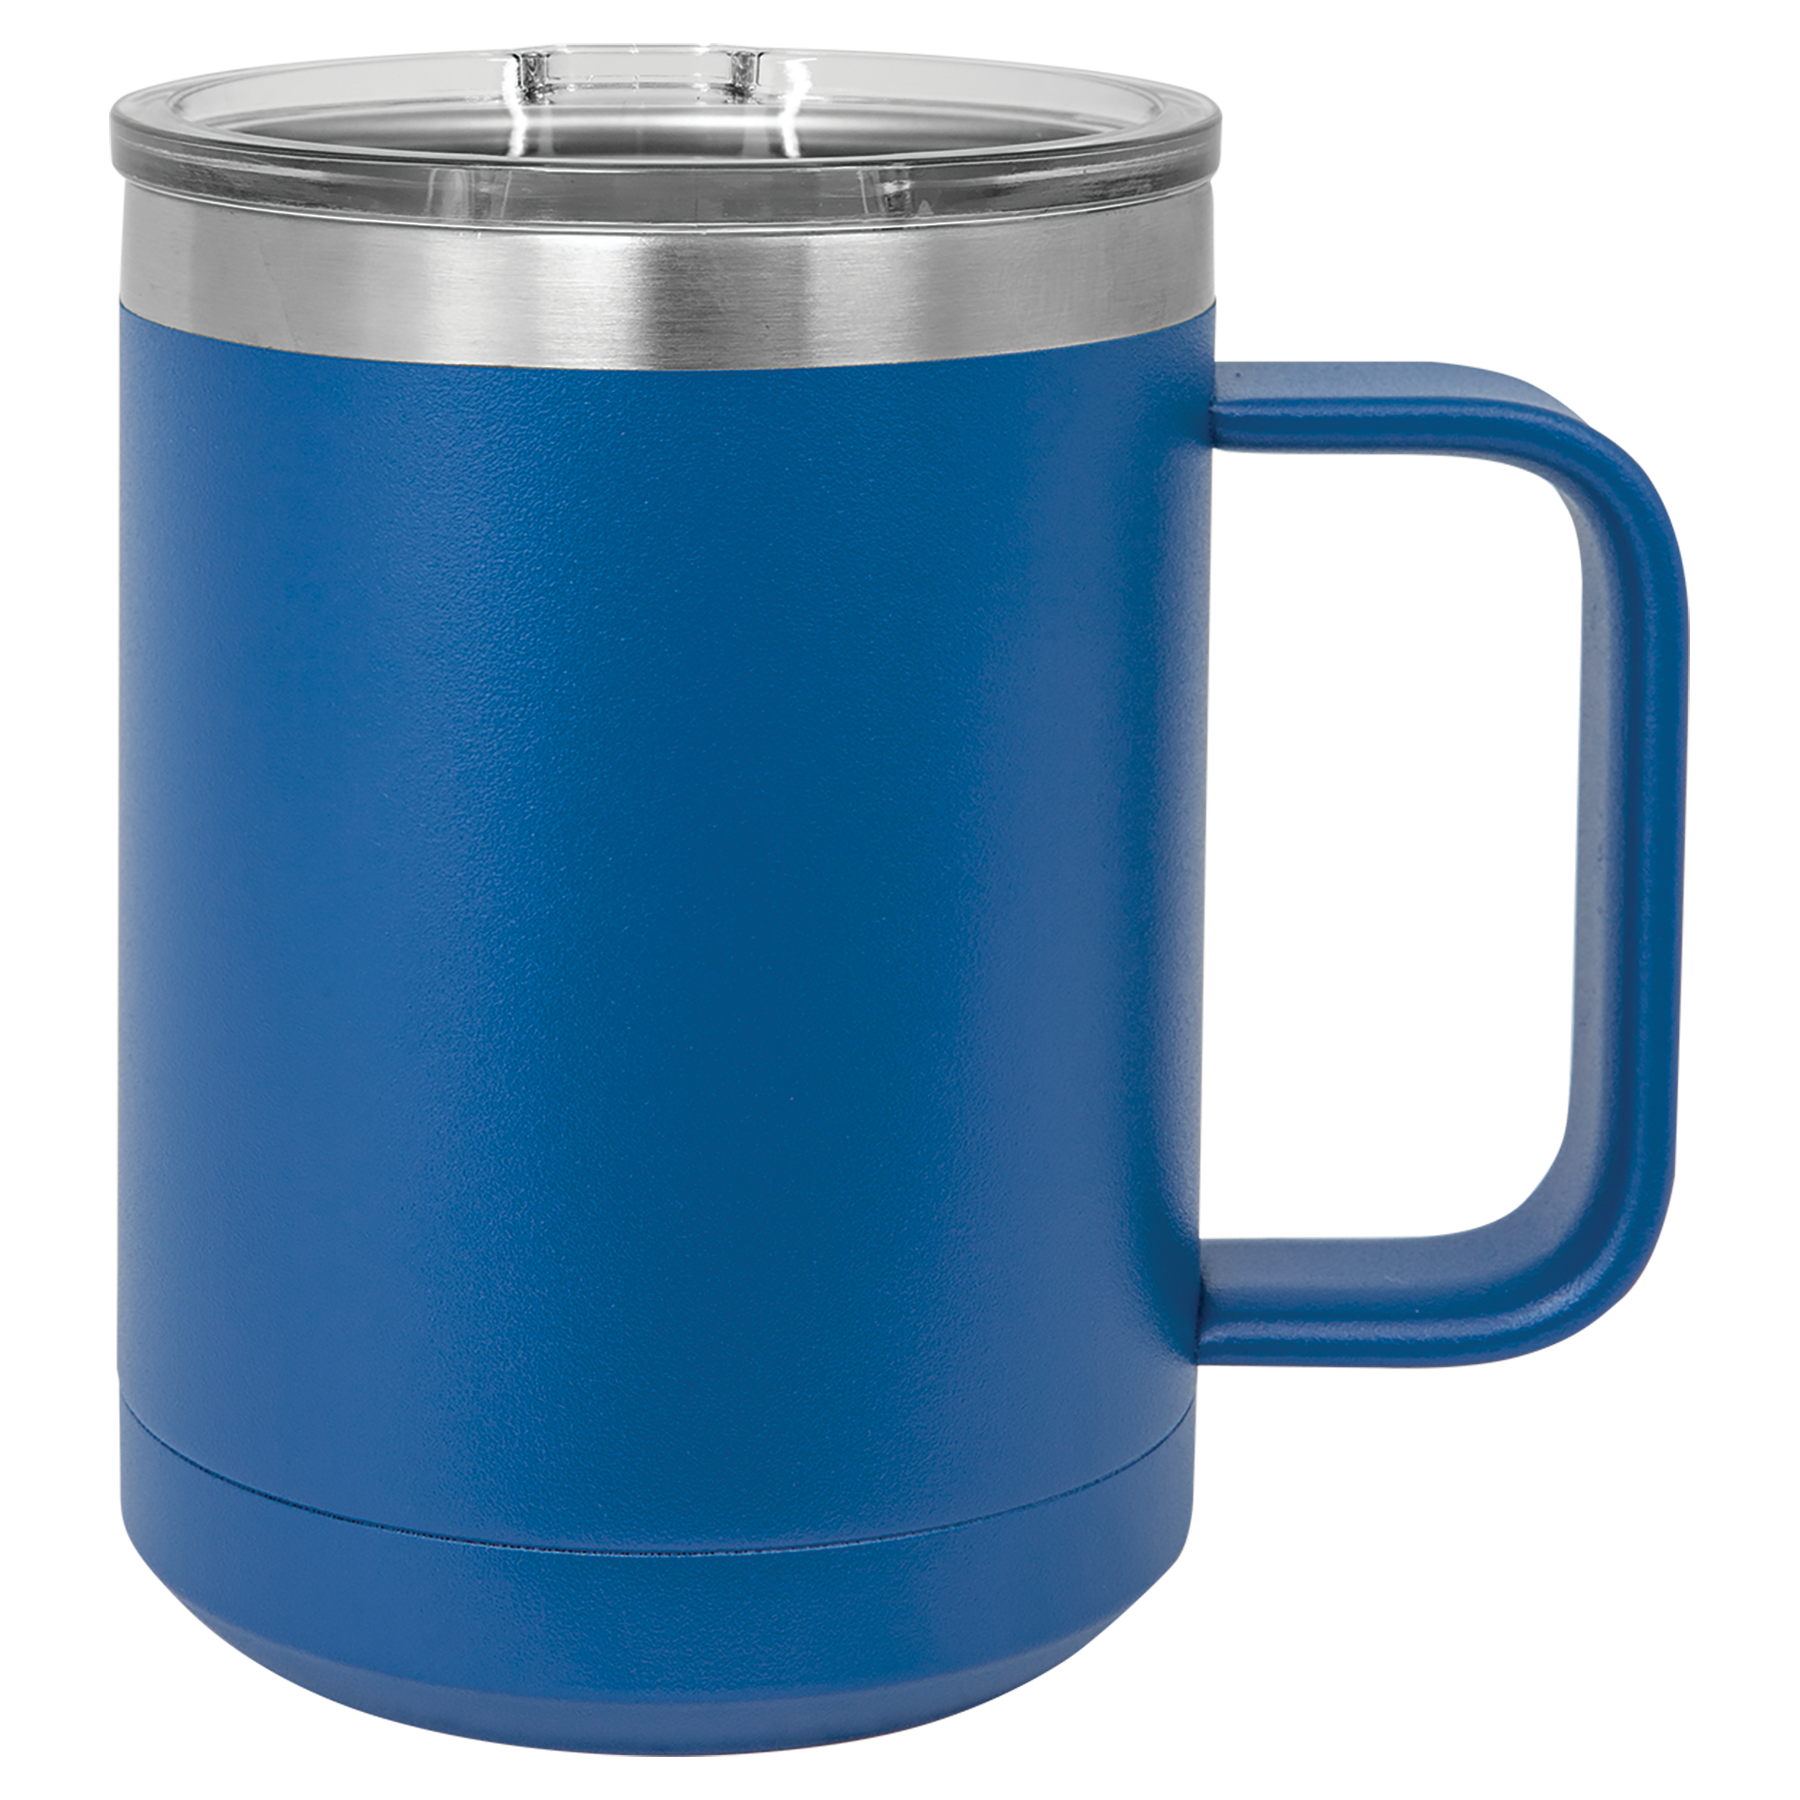 Royal Blue 15oz Coffee Mug -One Free Engraving  -Fits most Cup Holders  -Double-wall Vacuum Insulated  -Made from 18/8 Gauge Stainless Steel (Type 304 Food Grade)  -Lid is BPA Free (Hand Wash Only)  -Not recommended for Dishwasher  -Works with Cold and Hot Drinks  -18 Color Options  -Perfect for Personalized Gifts, Awards, Incentives, Swag & Fundraisers